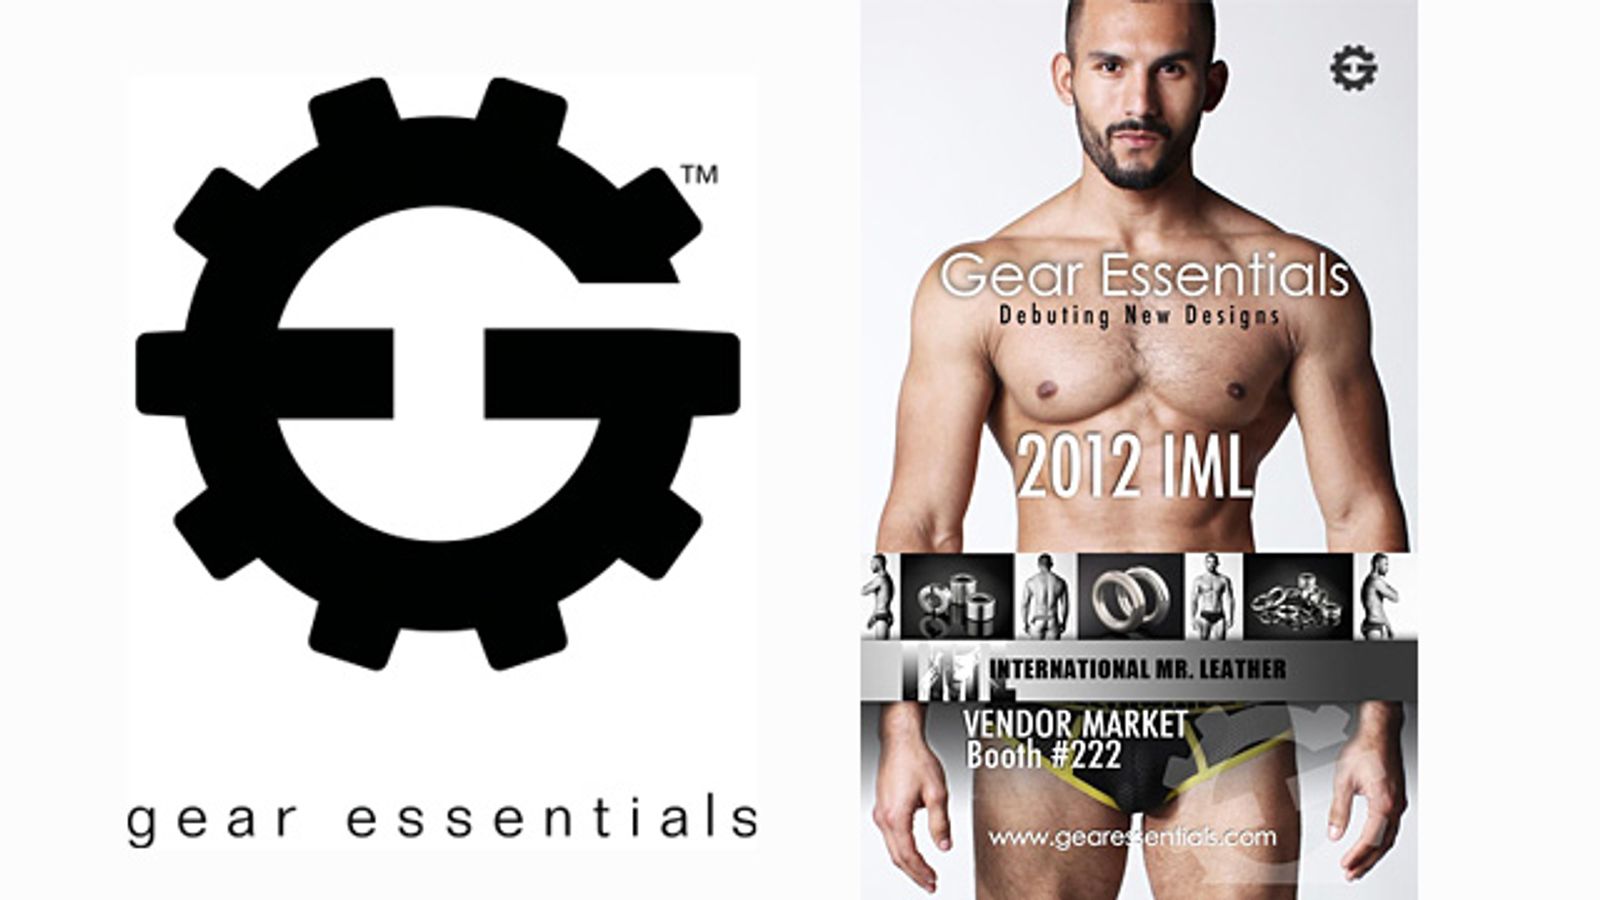 Gear Essentials to Deliver High-End Fetish, Fashion at IML 2012